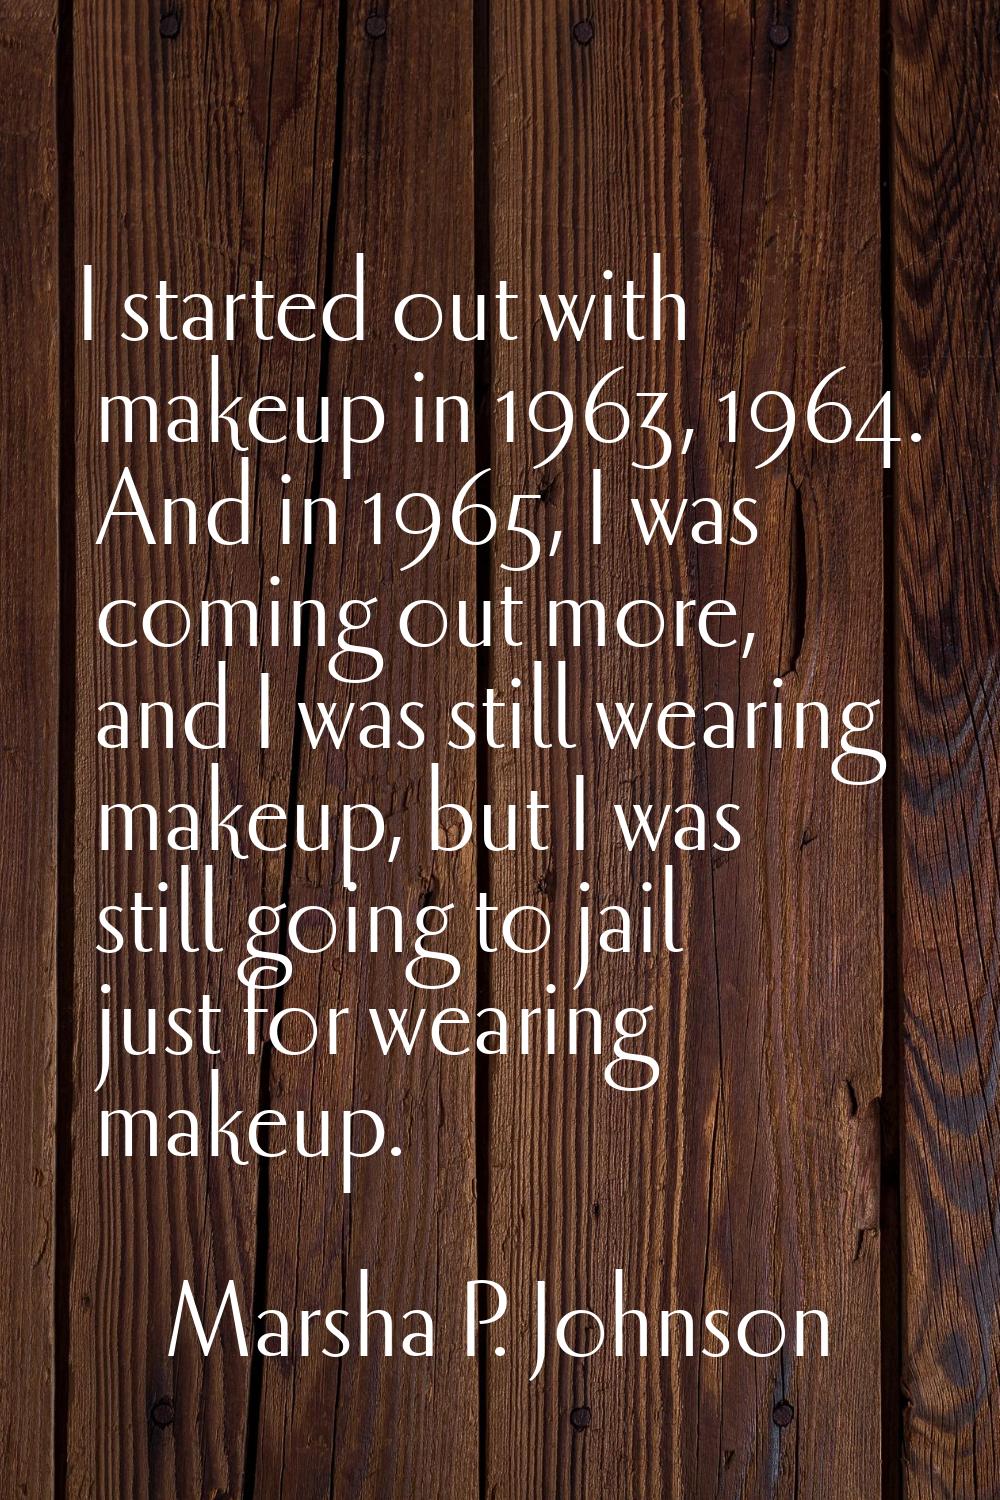 I started out with makeup in 1963, 1964. And in 1965, I was coming out more, and I was still wearin